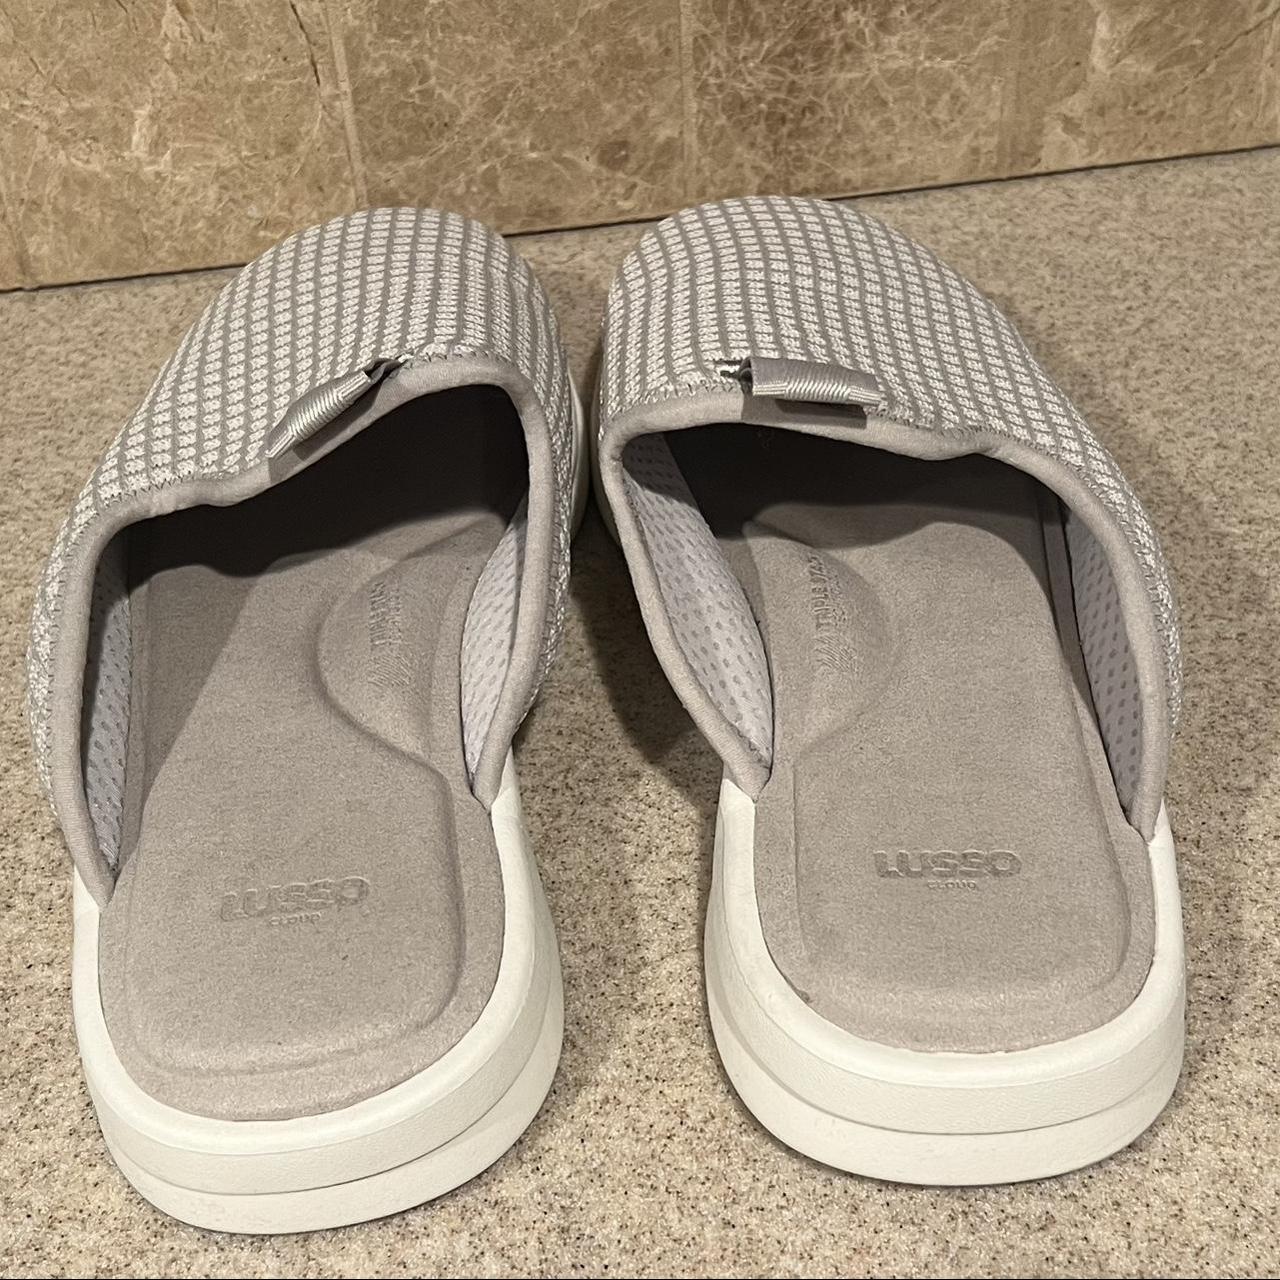 Lusso The Label Men's Grey and White Slides (2)